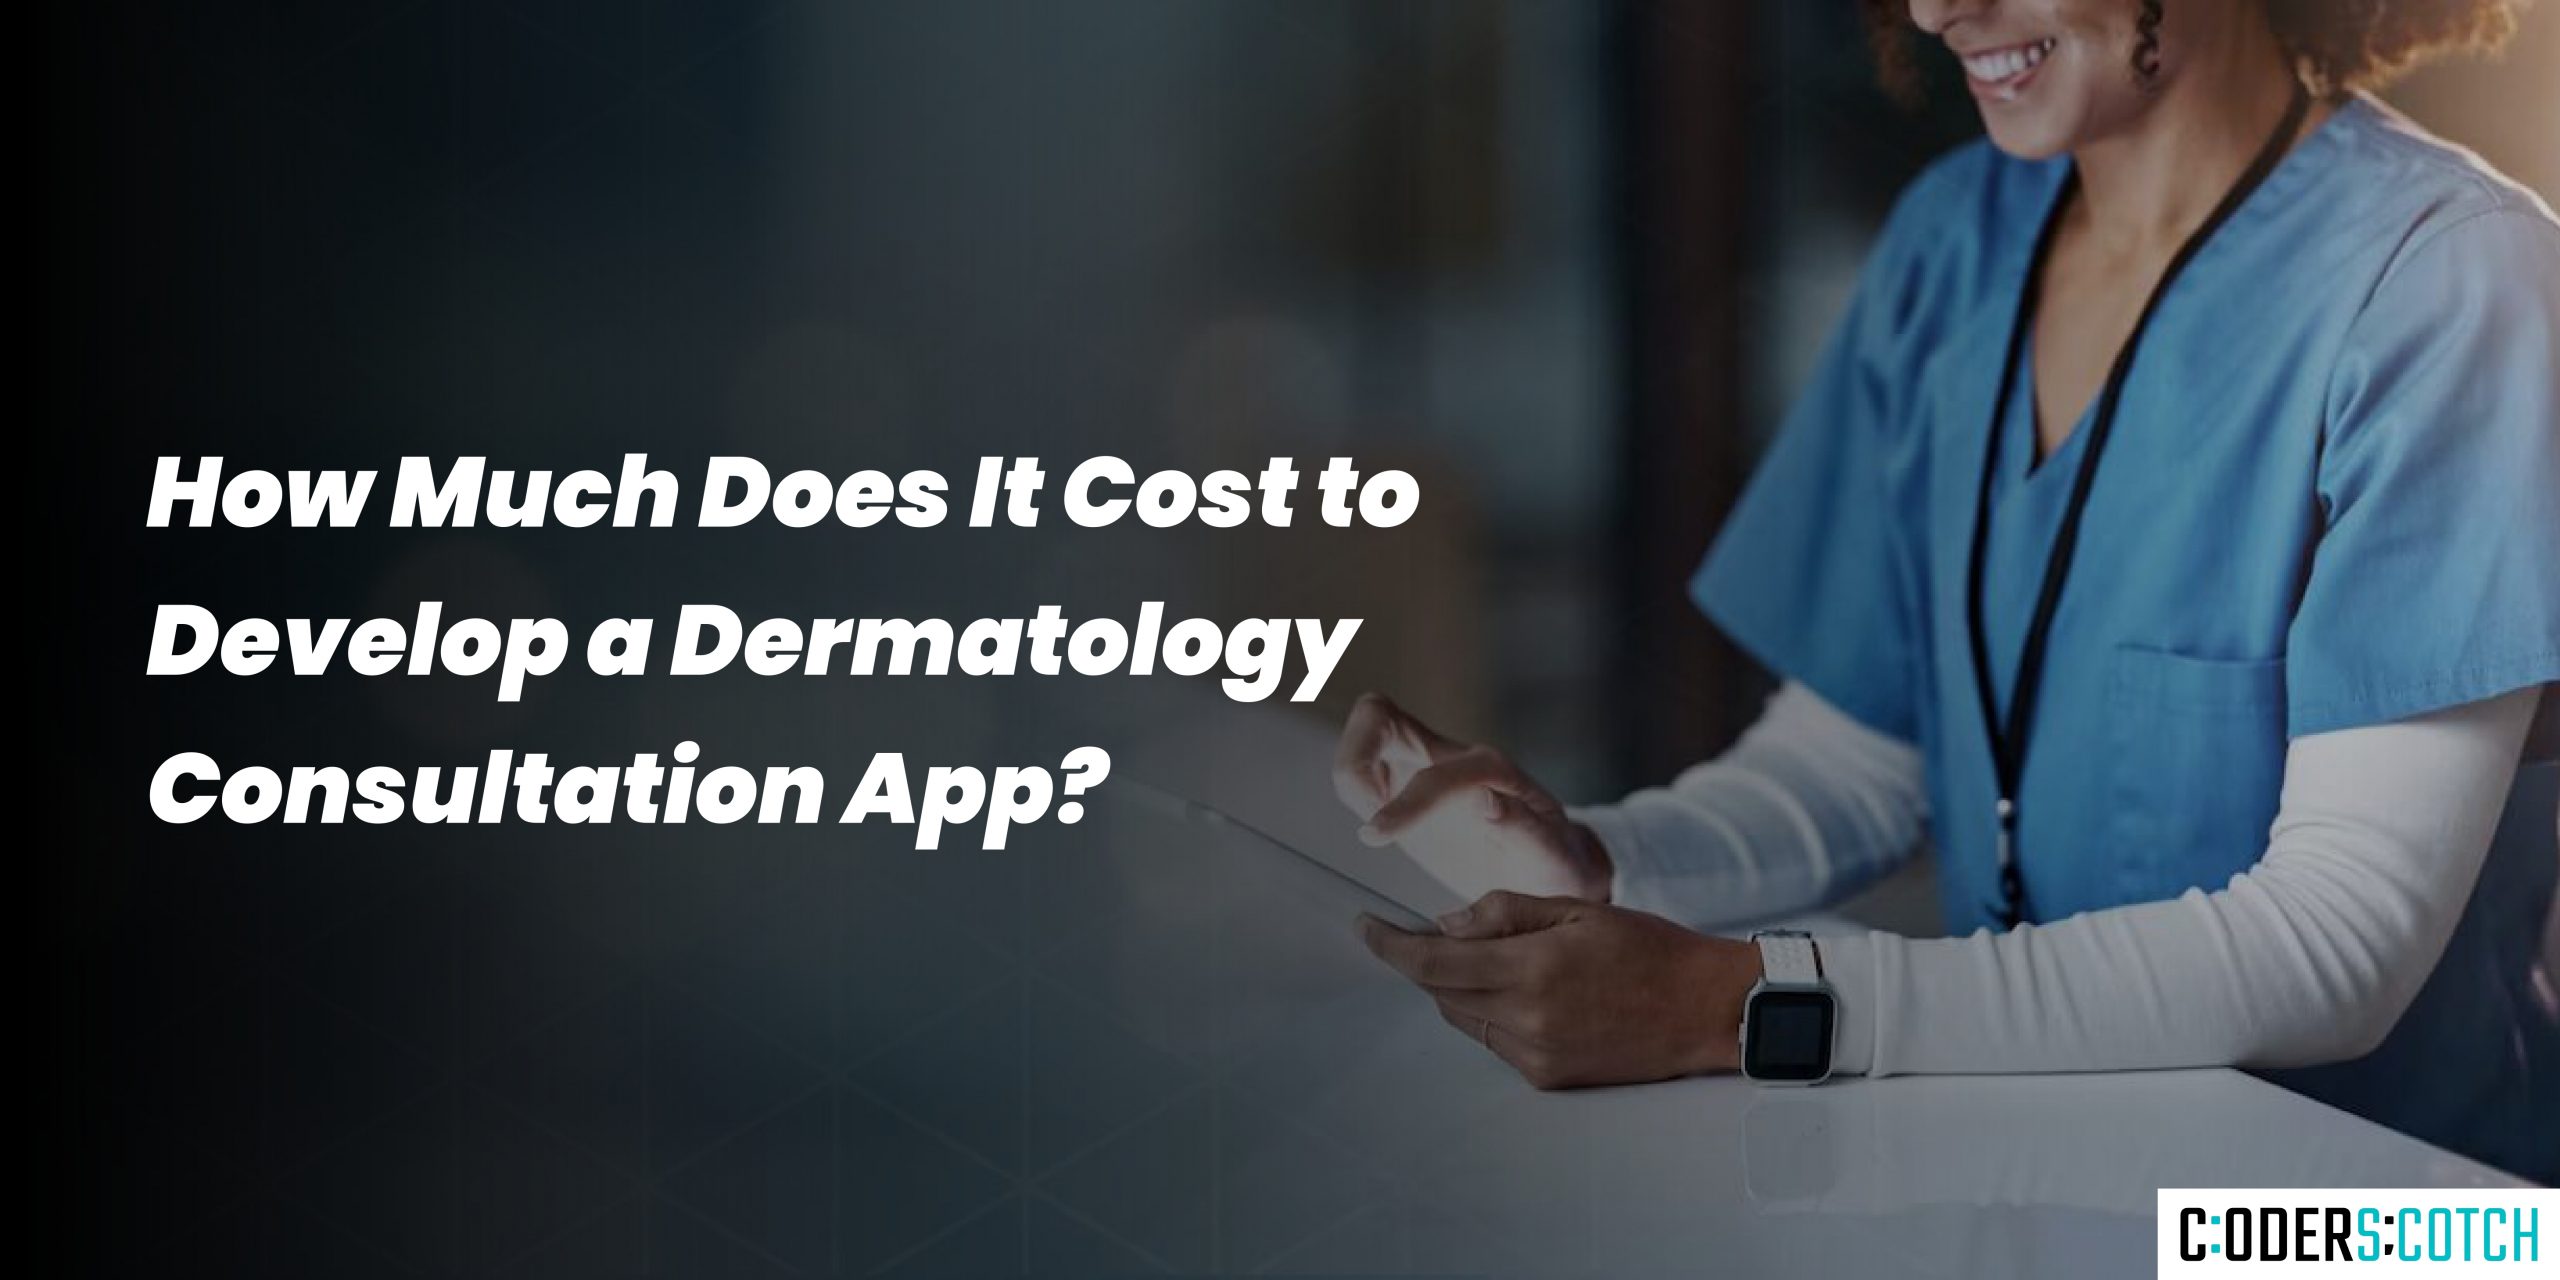 How Much Does It Cost to Develop a Dermatology Consultation App?